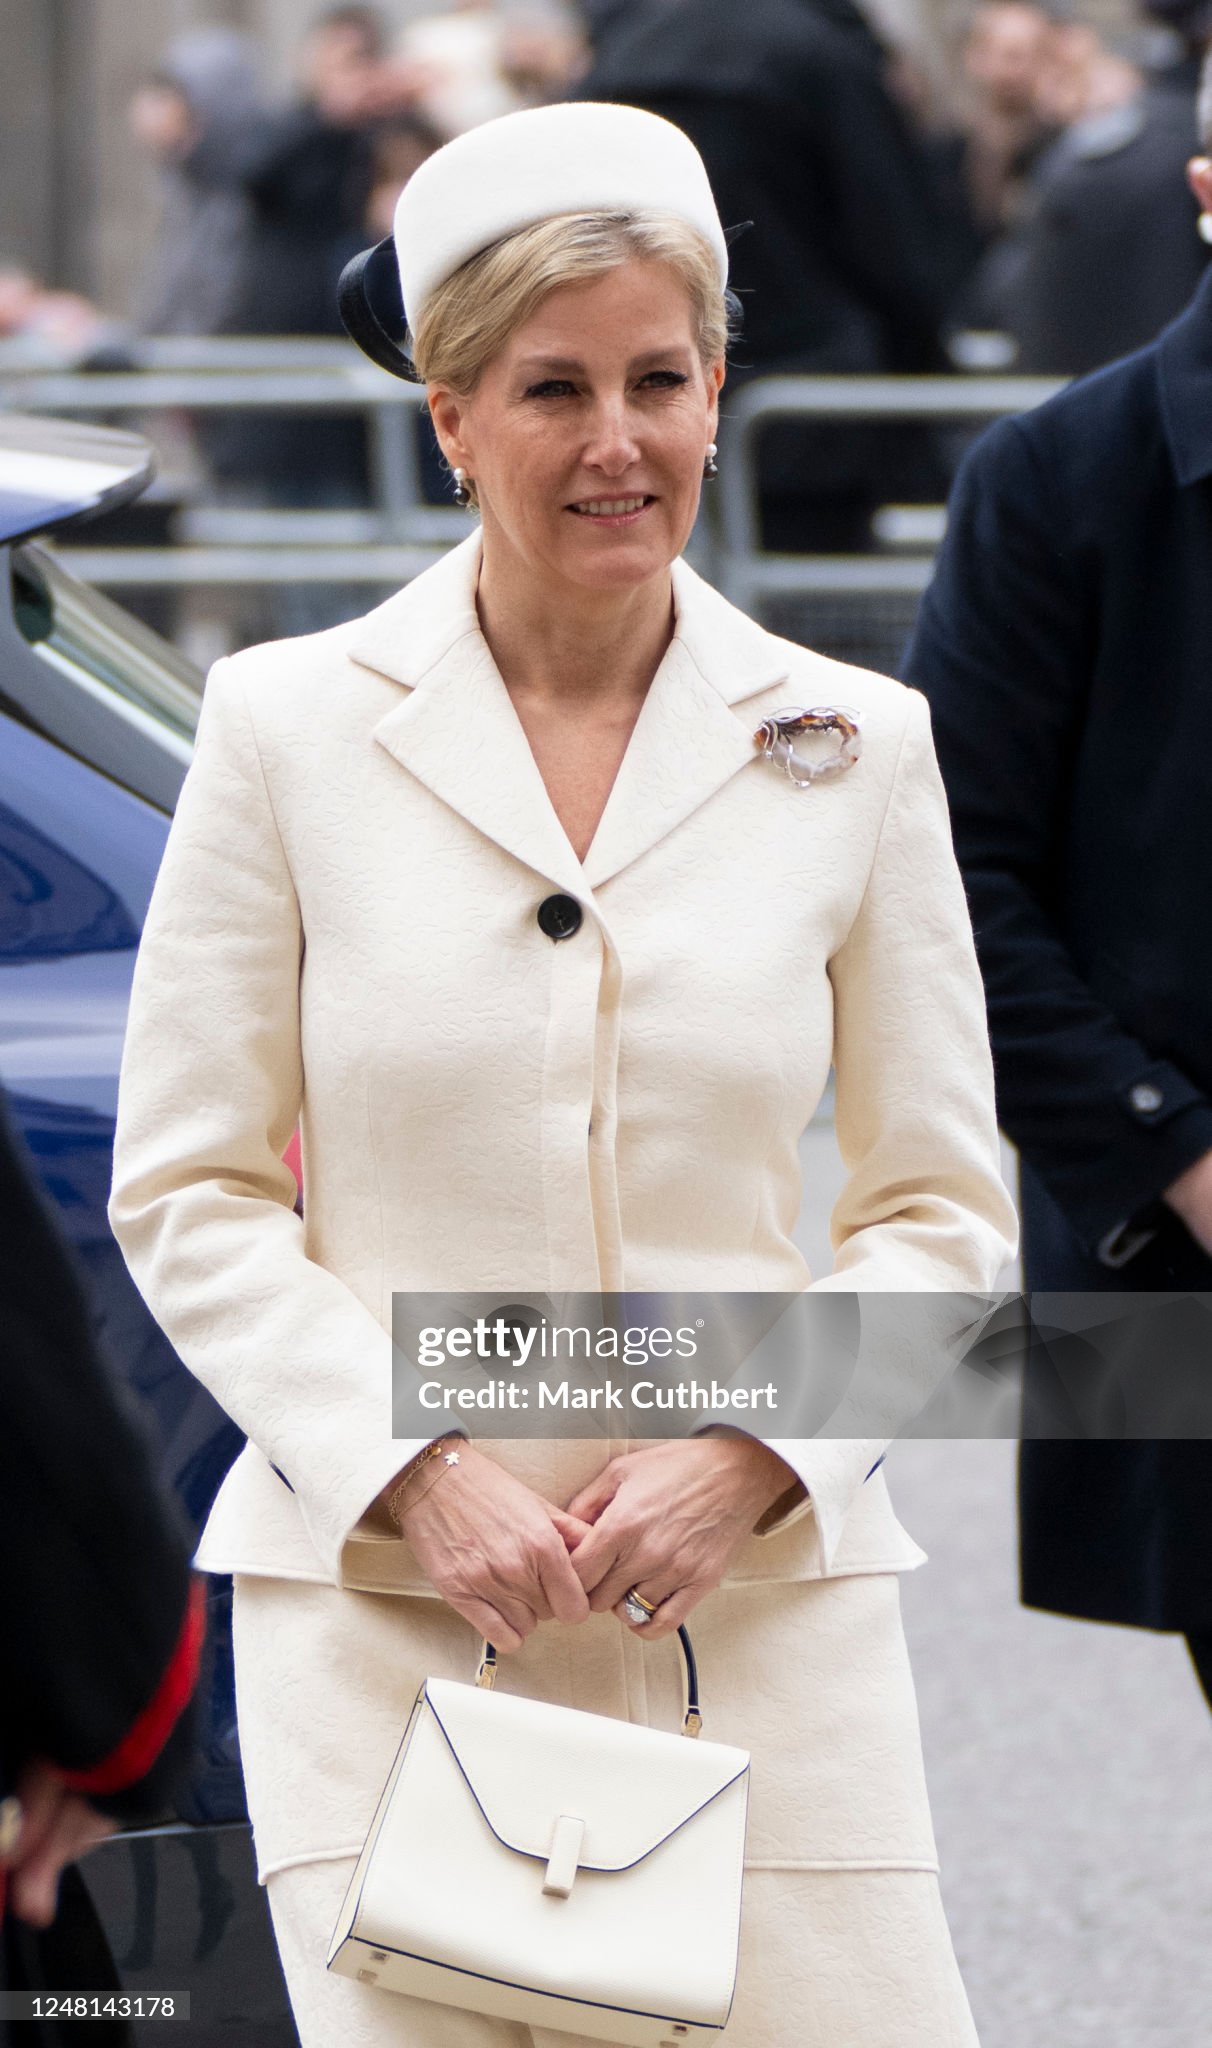 the-british-royal-family-attend-annual-commonwealth-day-service.jpg